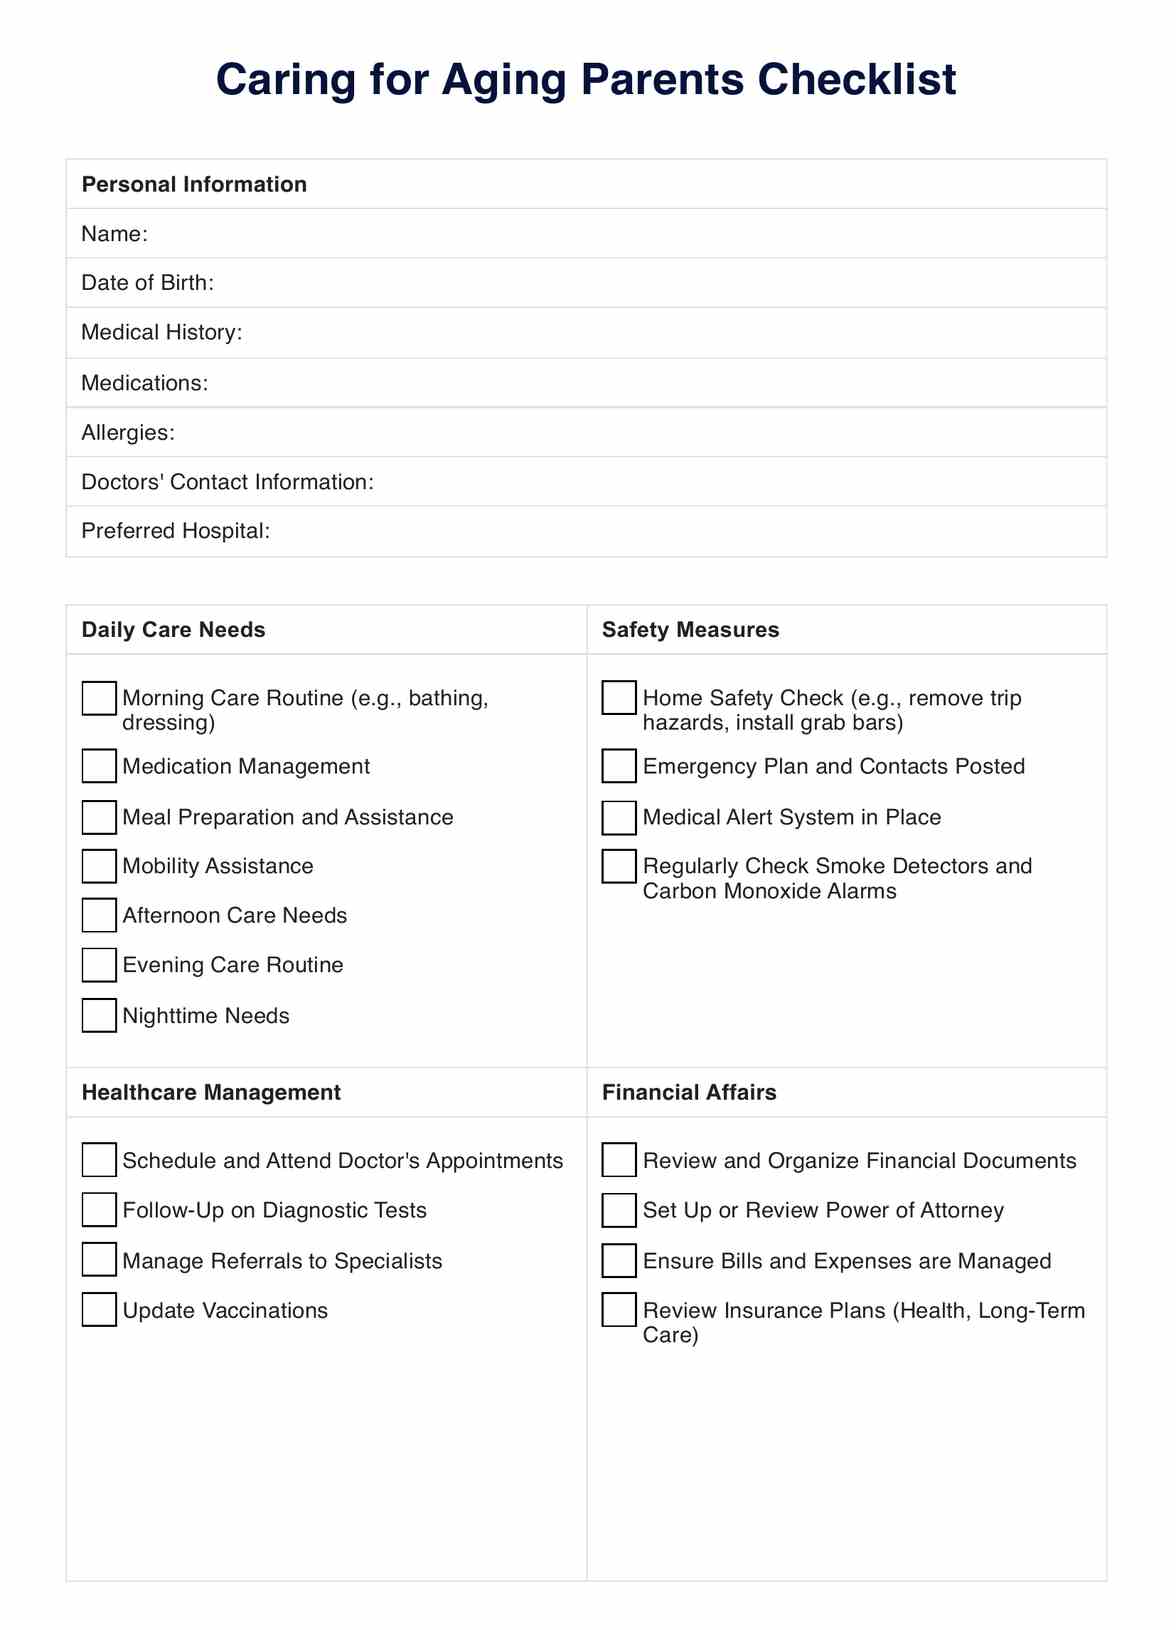 Caring For Aging Parents Checklist PDF Example